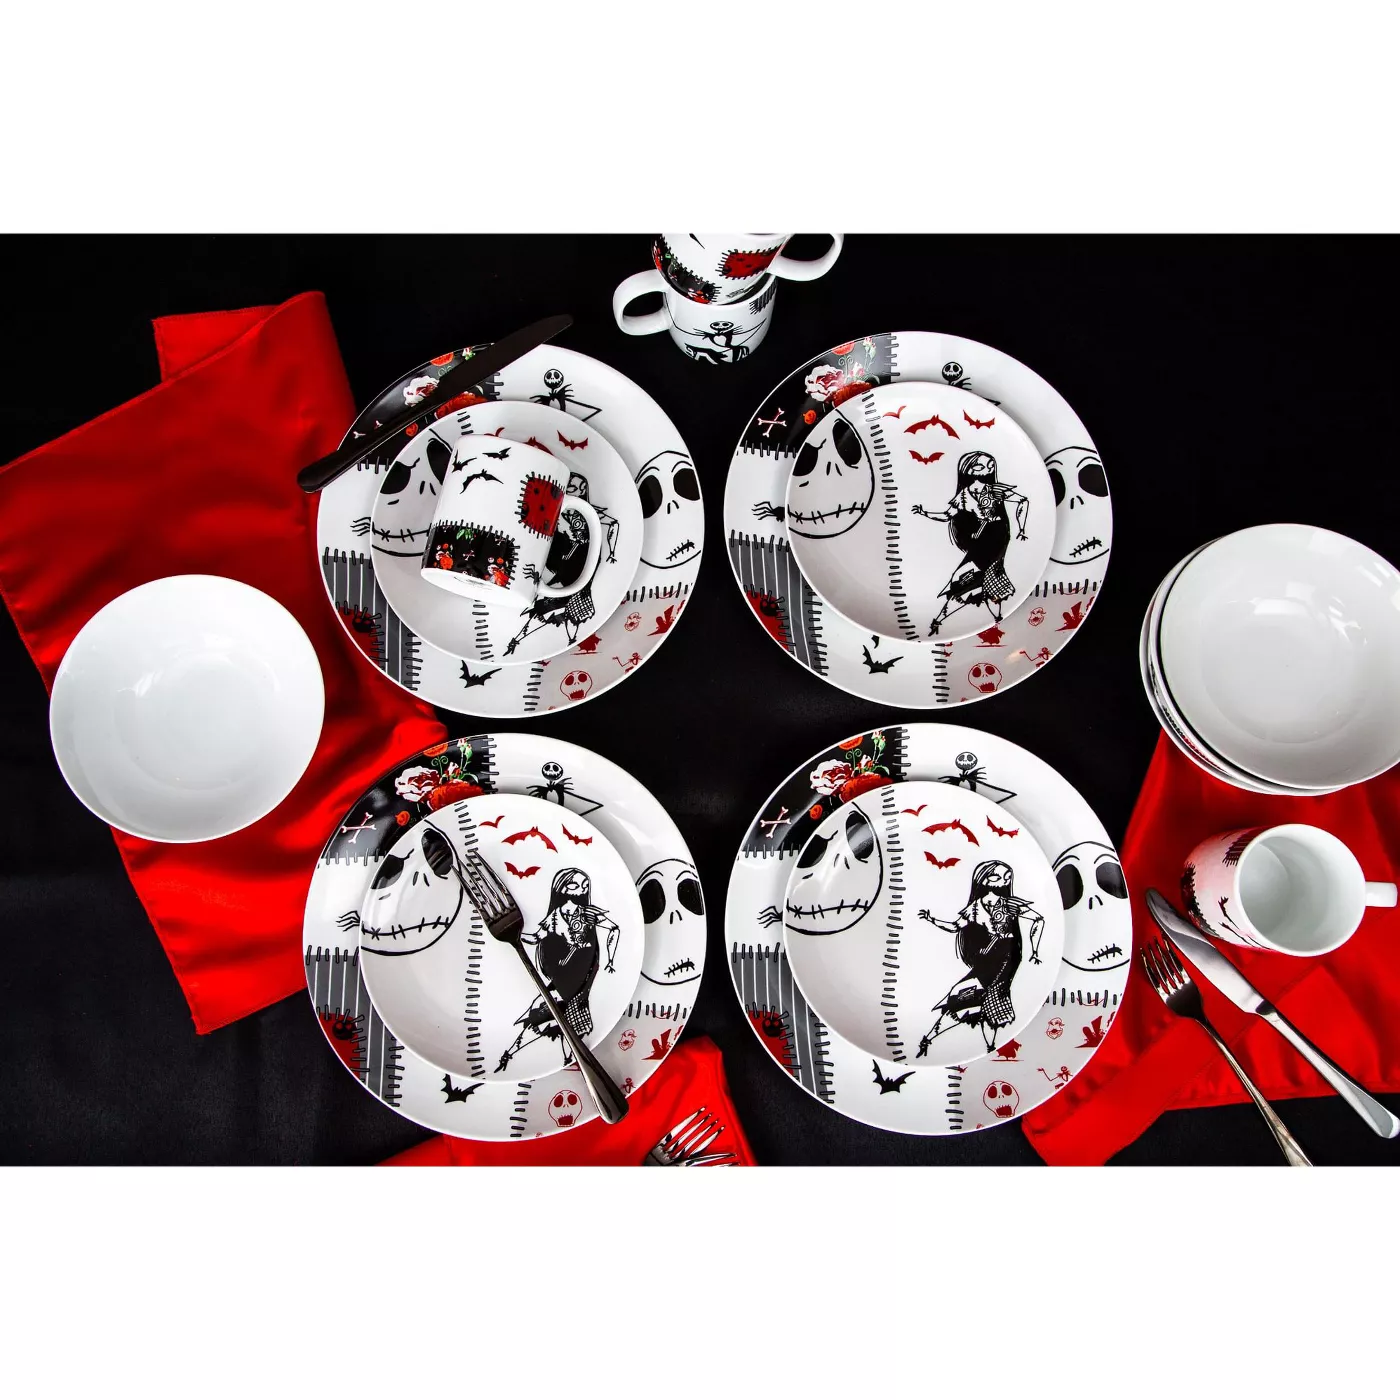 Seven20 The Nightmare Before Christmas Patched Up 16-Piece Dinnerware Set - image 2 of 7